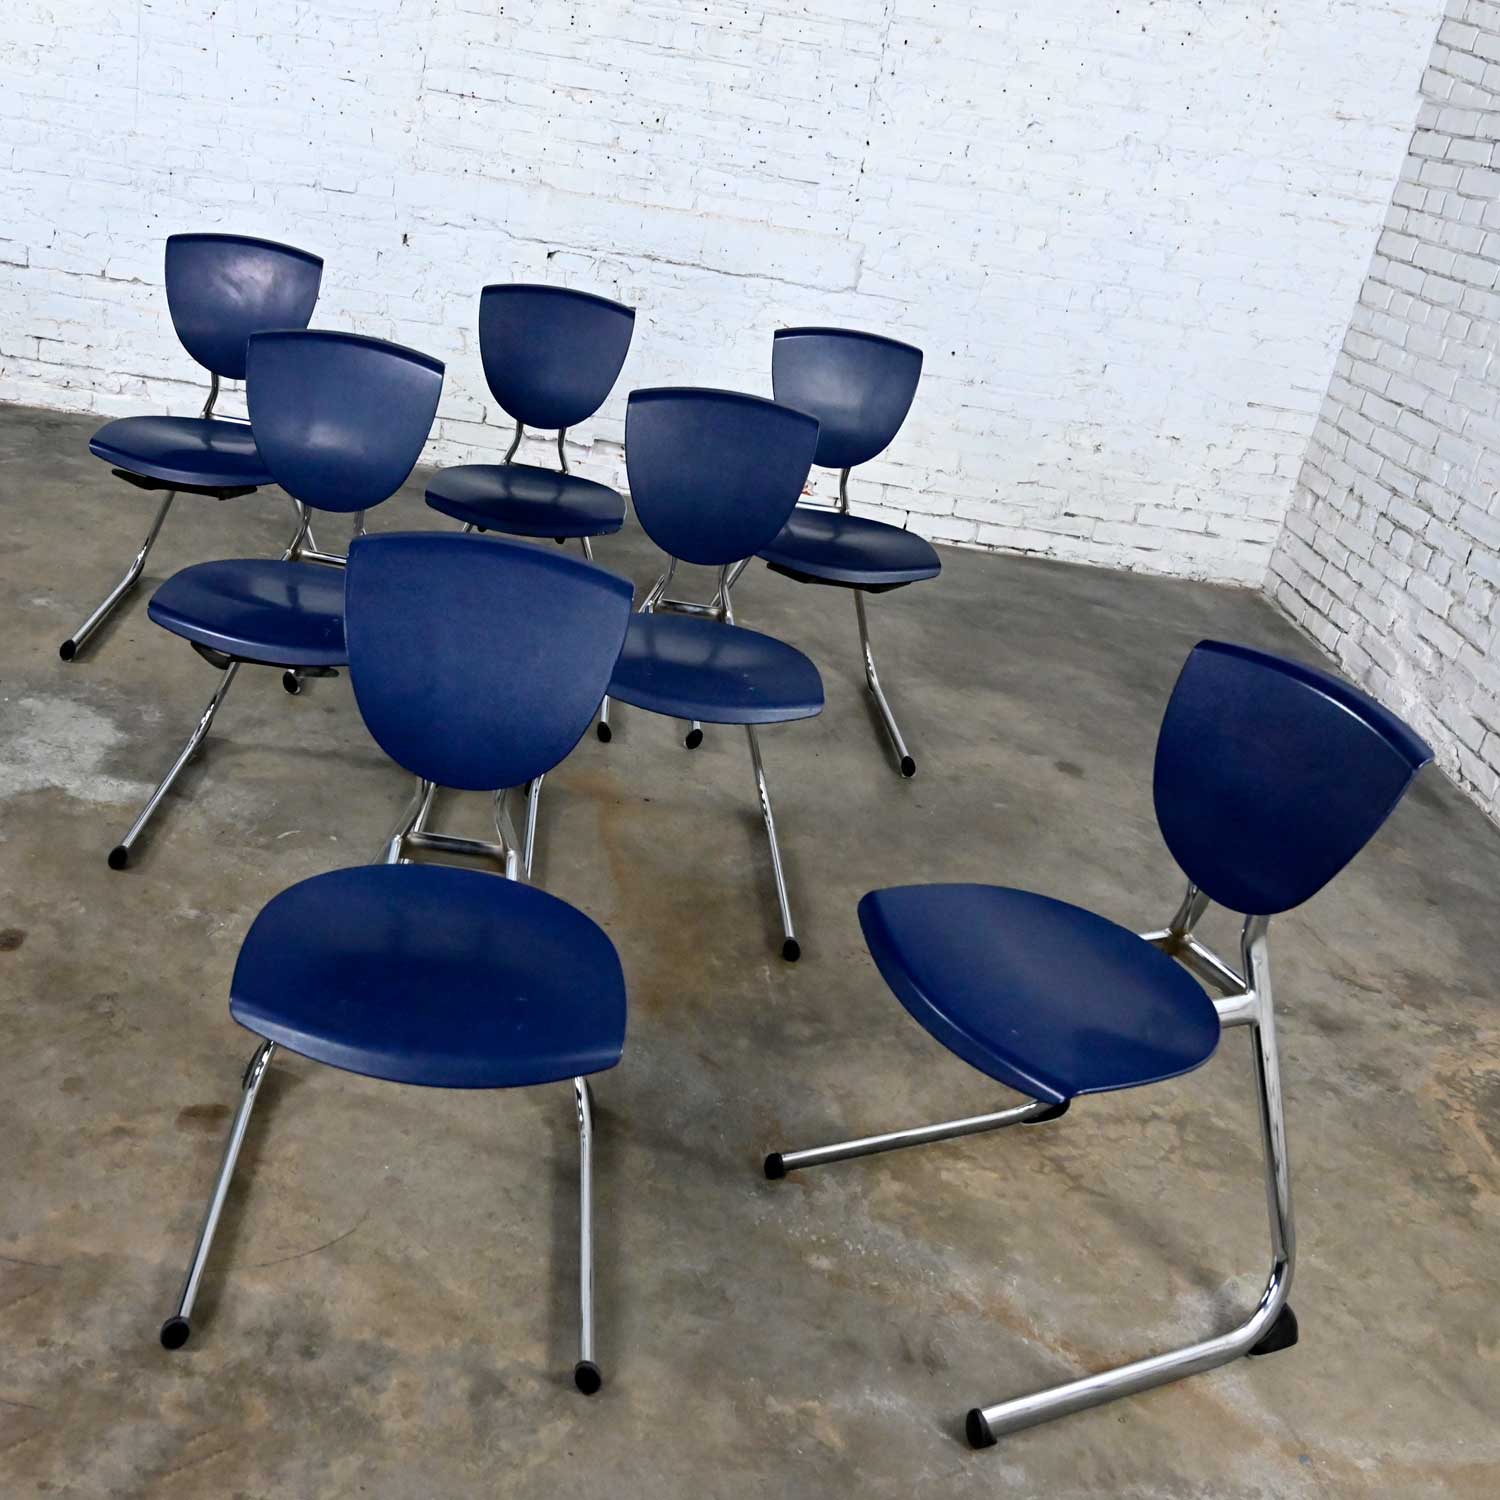 7 Vintage Modern Dark Blue Plastic & Chrome Reverse Cantilever Stacking Intellect Dining Chairs by KI Seating